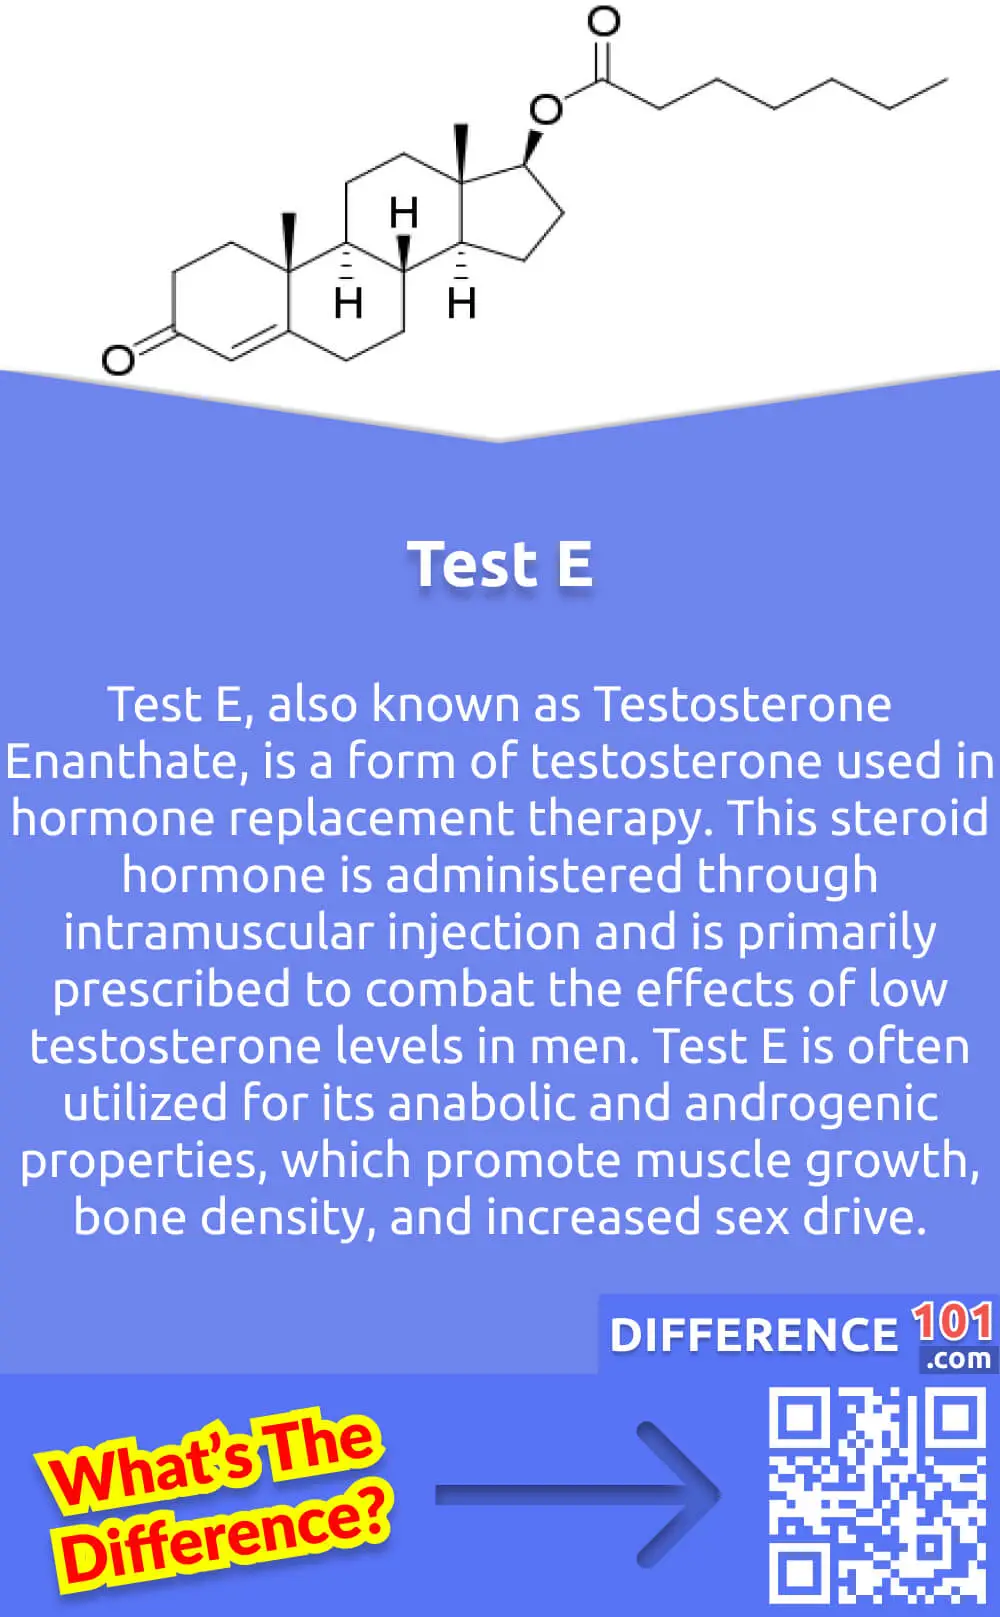 What Is Test E? Test E, also known as Testosterone Enanthate, is a form of testosterone used in hormone replacement therapy. This steroid hormone is administered through intramuscular injection and is primarily prescribed to combat the effects of low testosterone levels in men. Test E is often utilized for its anabolic and androgenic properties, which promote muscle growth, bone density, and increased sex drive. Additionally, it can alleviate symptoms of fatigue, depression, and sexual dysfunction associated with low testosterone levels. While Test E can offer many benefits to individuals with hormonal imbalances, it should only be used under the guidance and supervision of a qualified healthcare provider to ensure its safe and effective administration.
